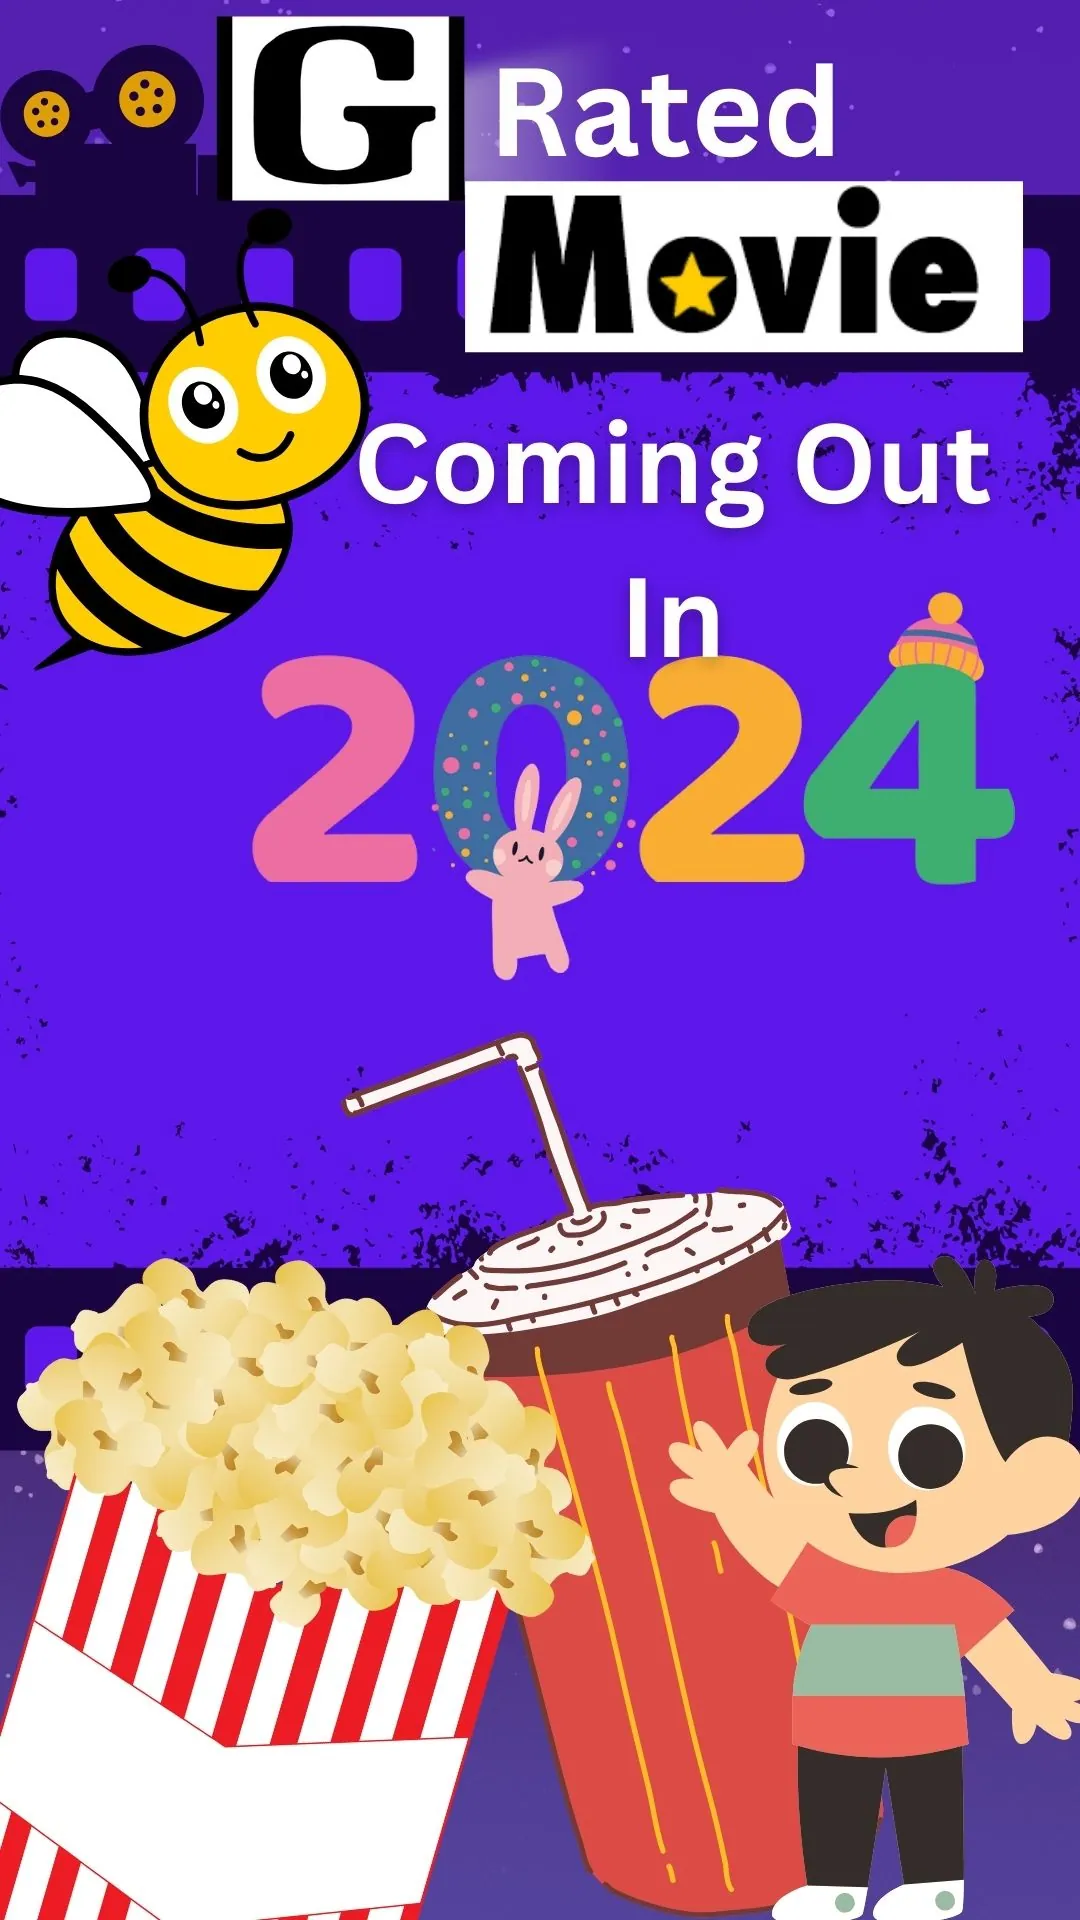 G-Rated Movies Coming Out In 2024